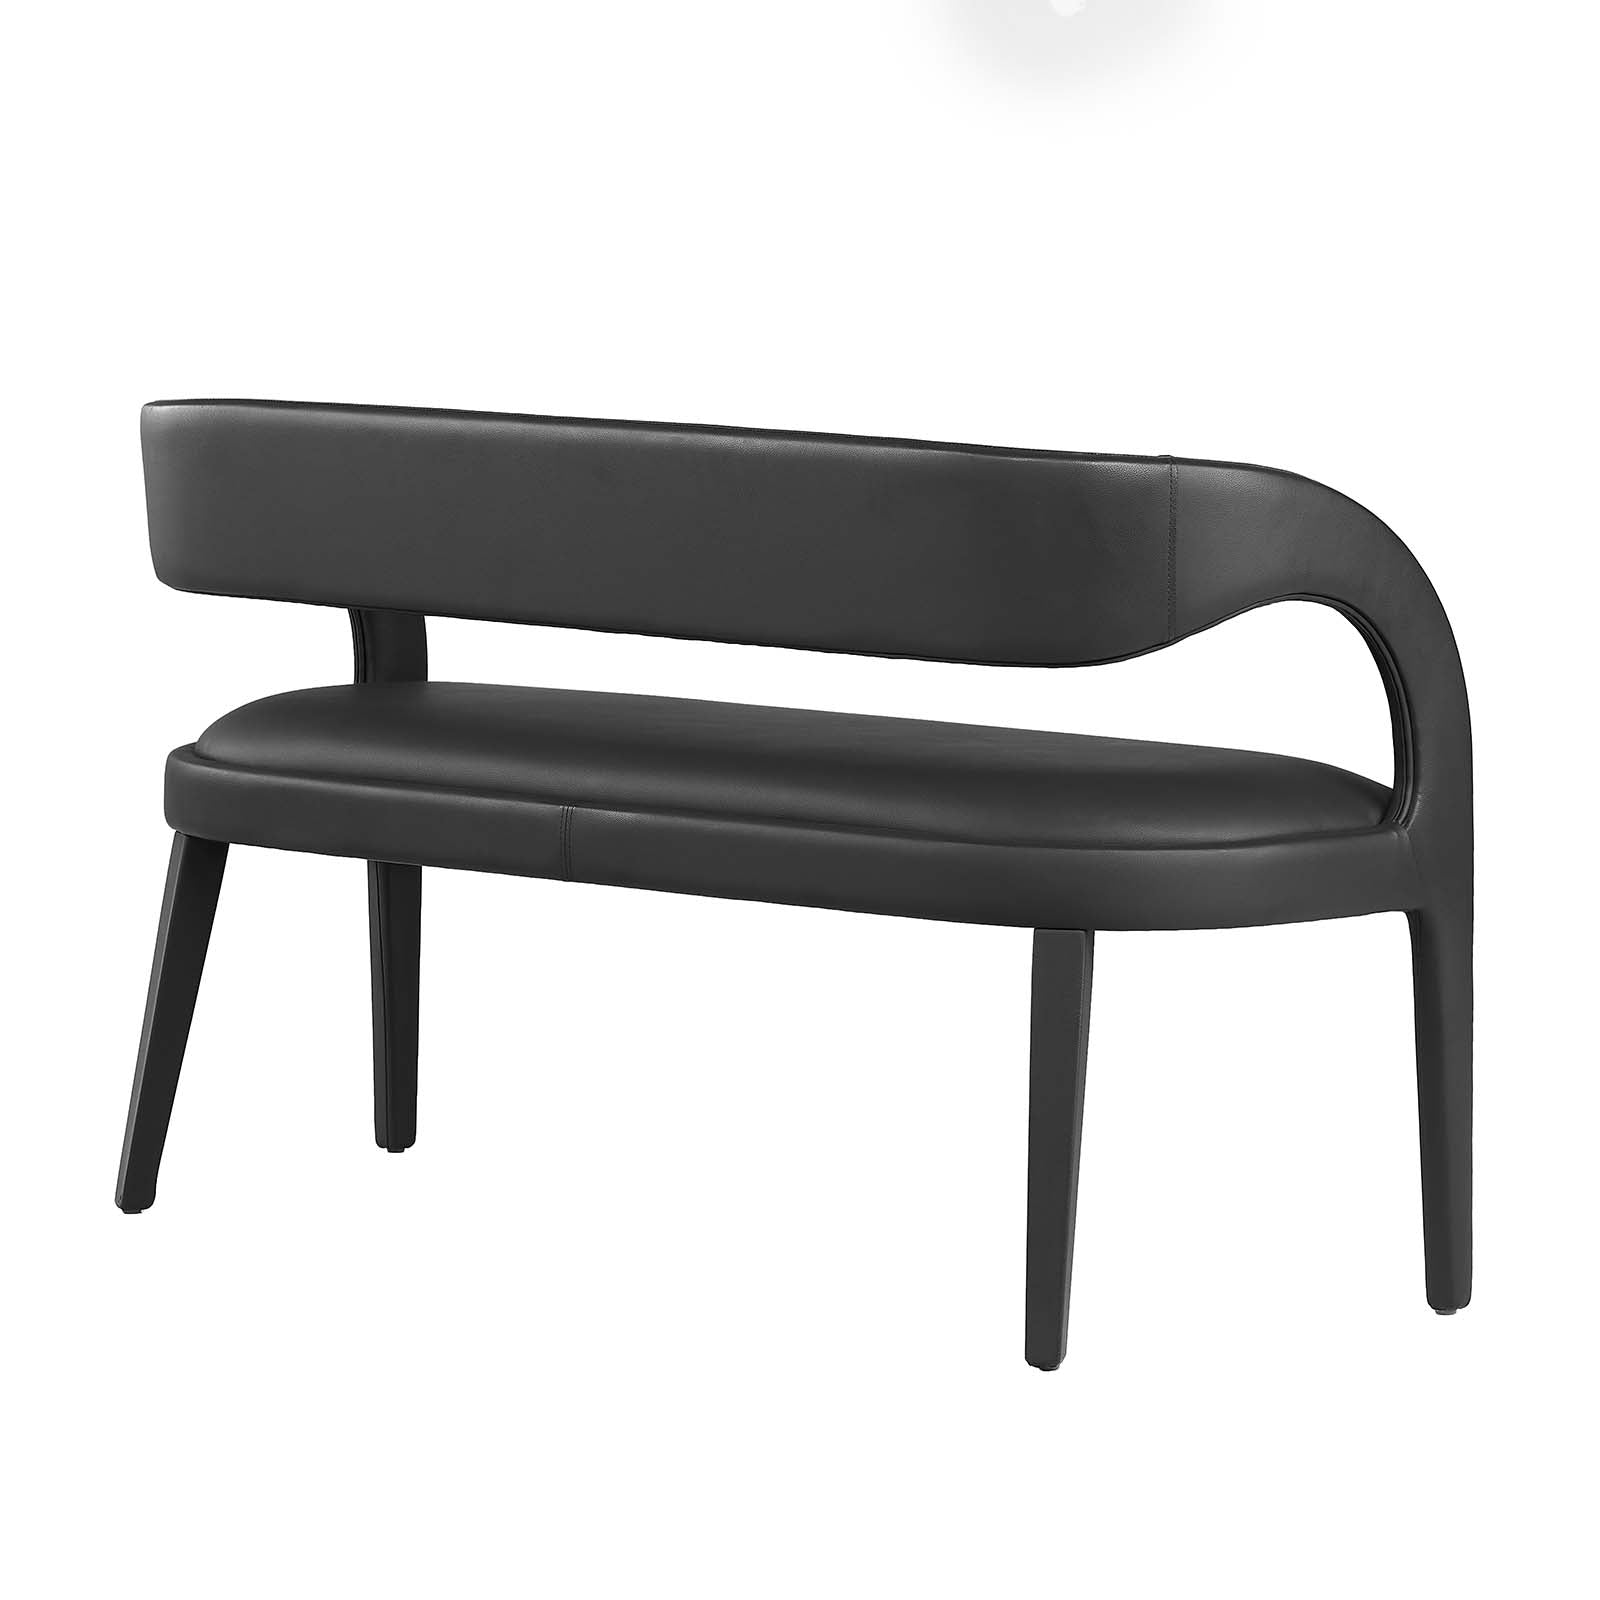 Pinnacle Vegan Leather Accent Bench - East Shore Modern Home Furnishings